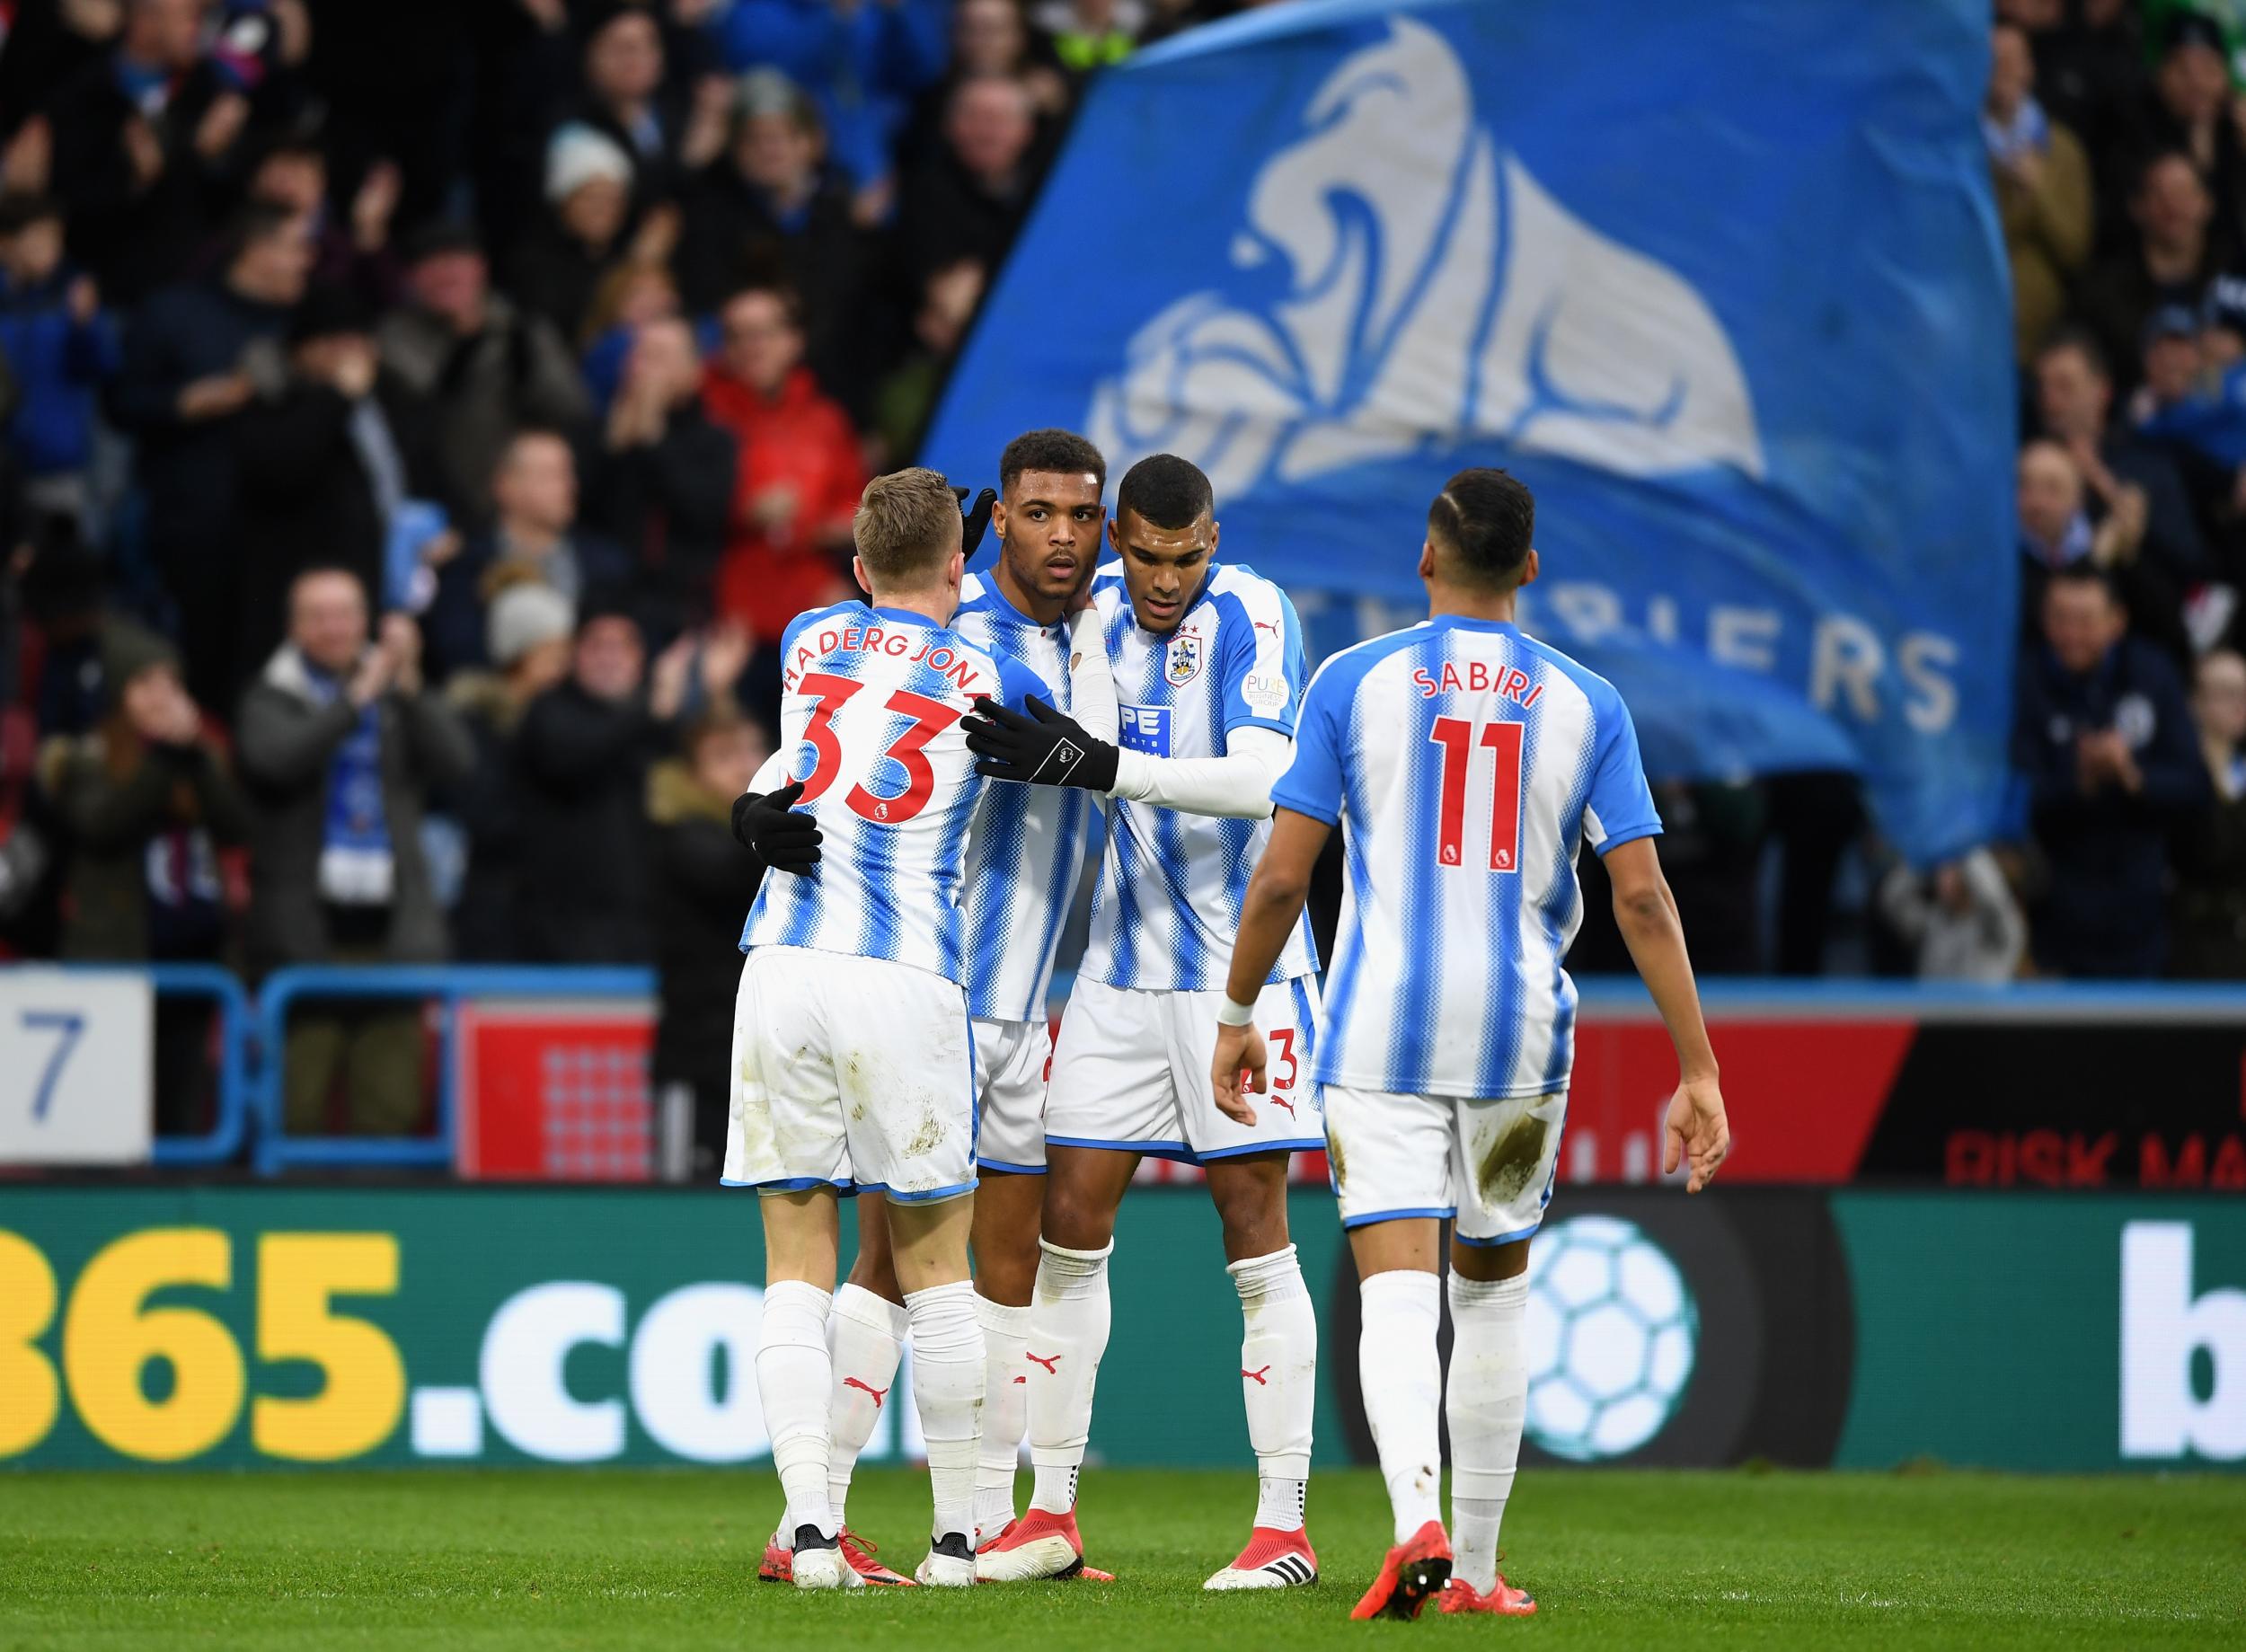 The Baggies take on Huddersfield in their next game (Getty)